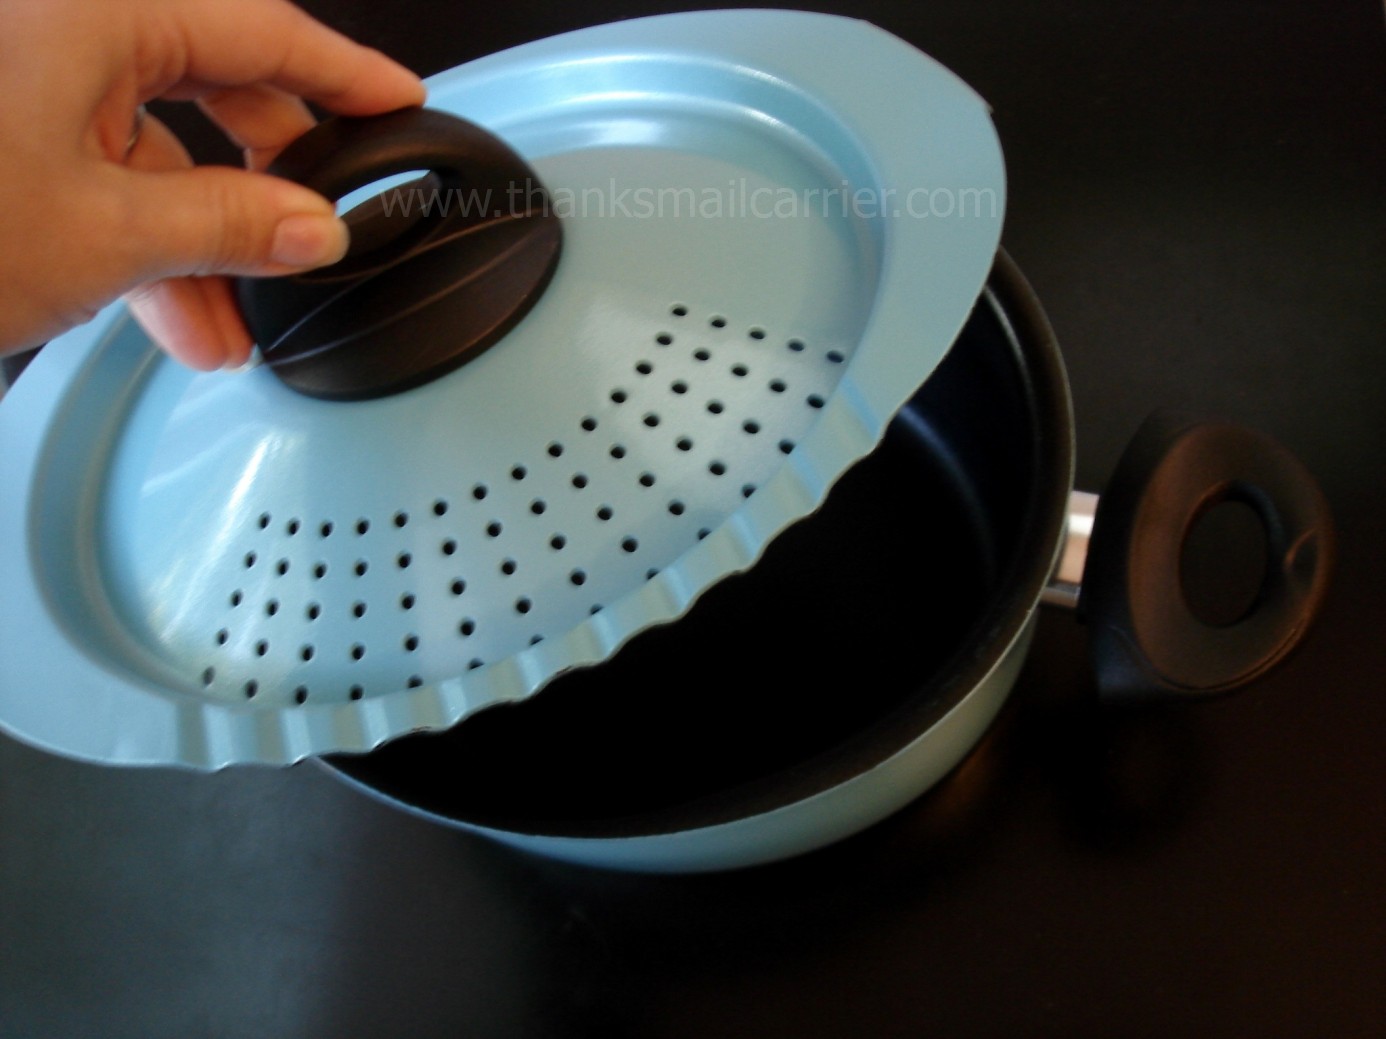 Thanks, Mail Carrier: Bialetti Aeternum Cookware {Review}